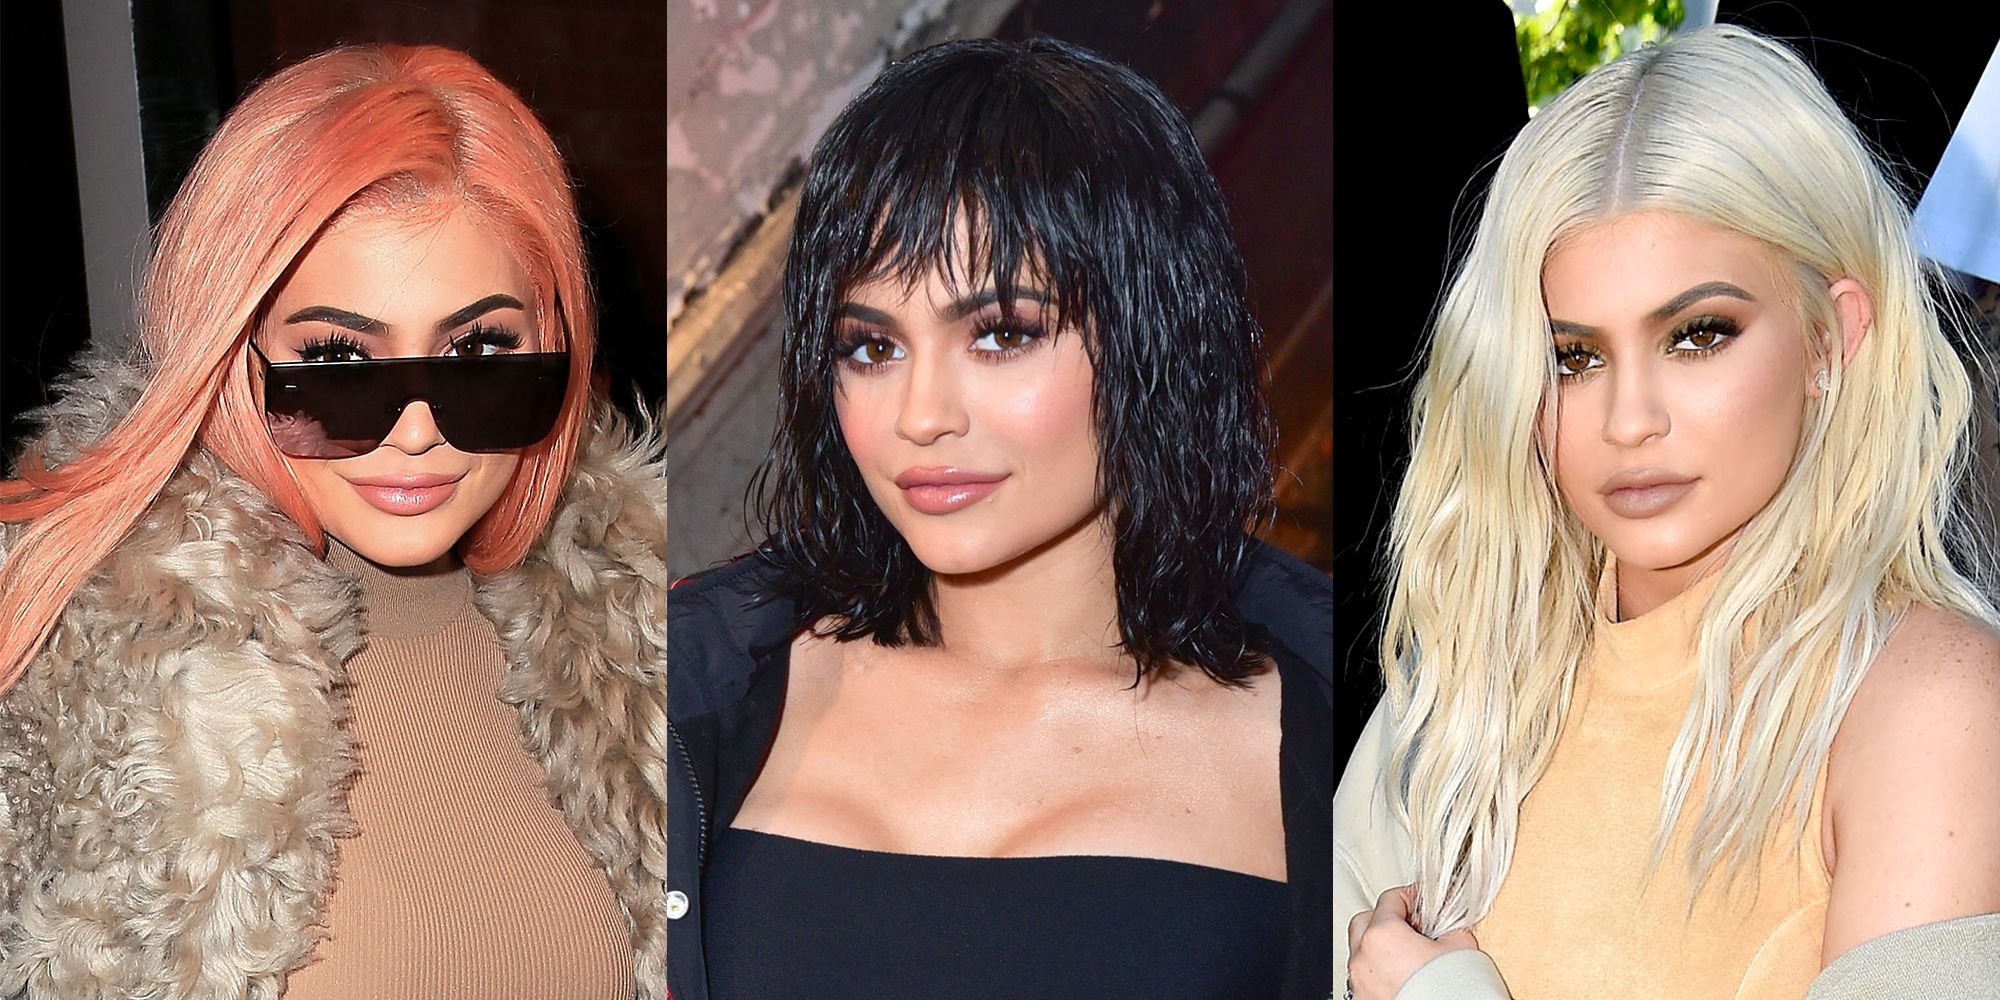 King Kylie Reigns Again: The Majestic Return of The Pastel Pink Hair!